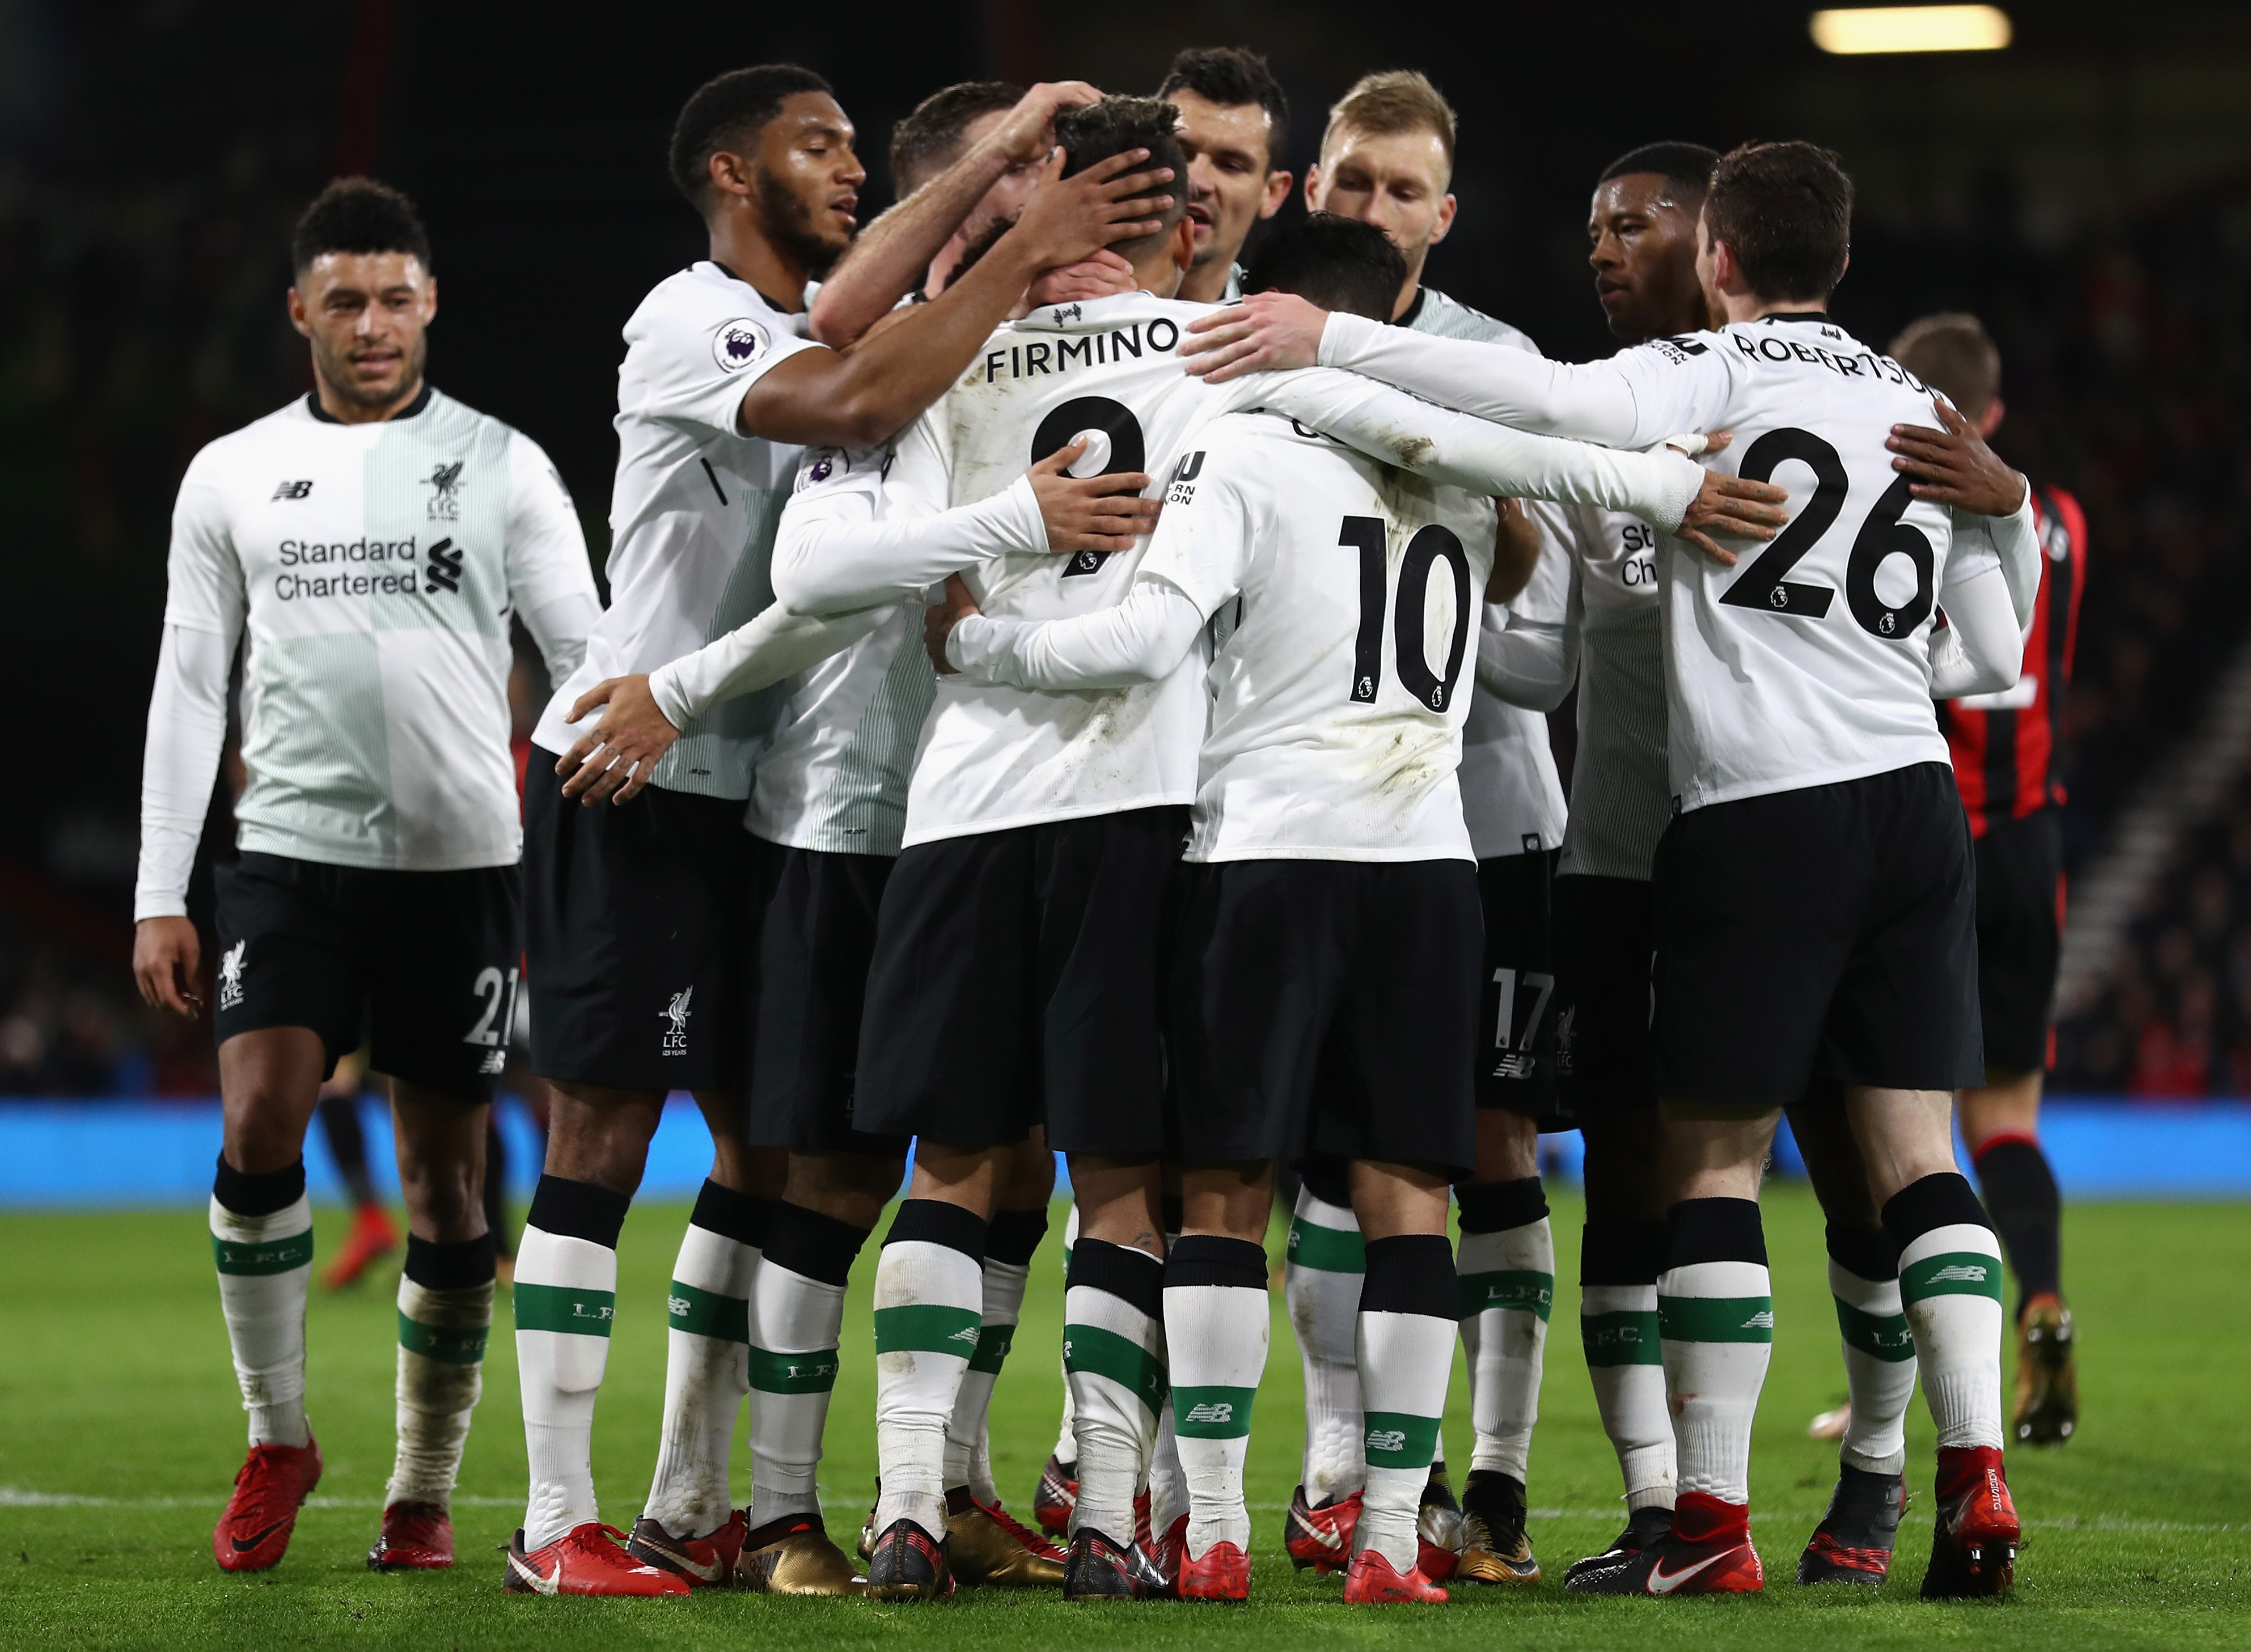 BOURNEMOUTH, ENGLAND - DECEMBER 17:  Roberto Firmino of Liverpool celebrates with his teammates after scoring his sides fourth goal during the Premier League match between AFC Bournemouth and Liverpool at Vitality Stadium on December 17, 2017 in Bournemouth, England.  (Photo by Bryn Lennon/Getty Images)